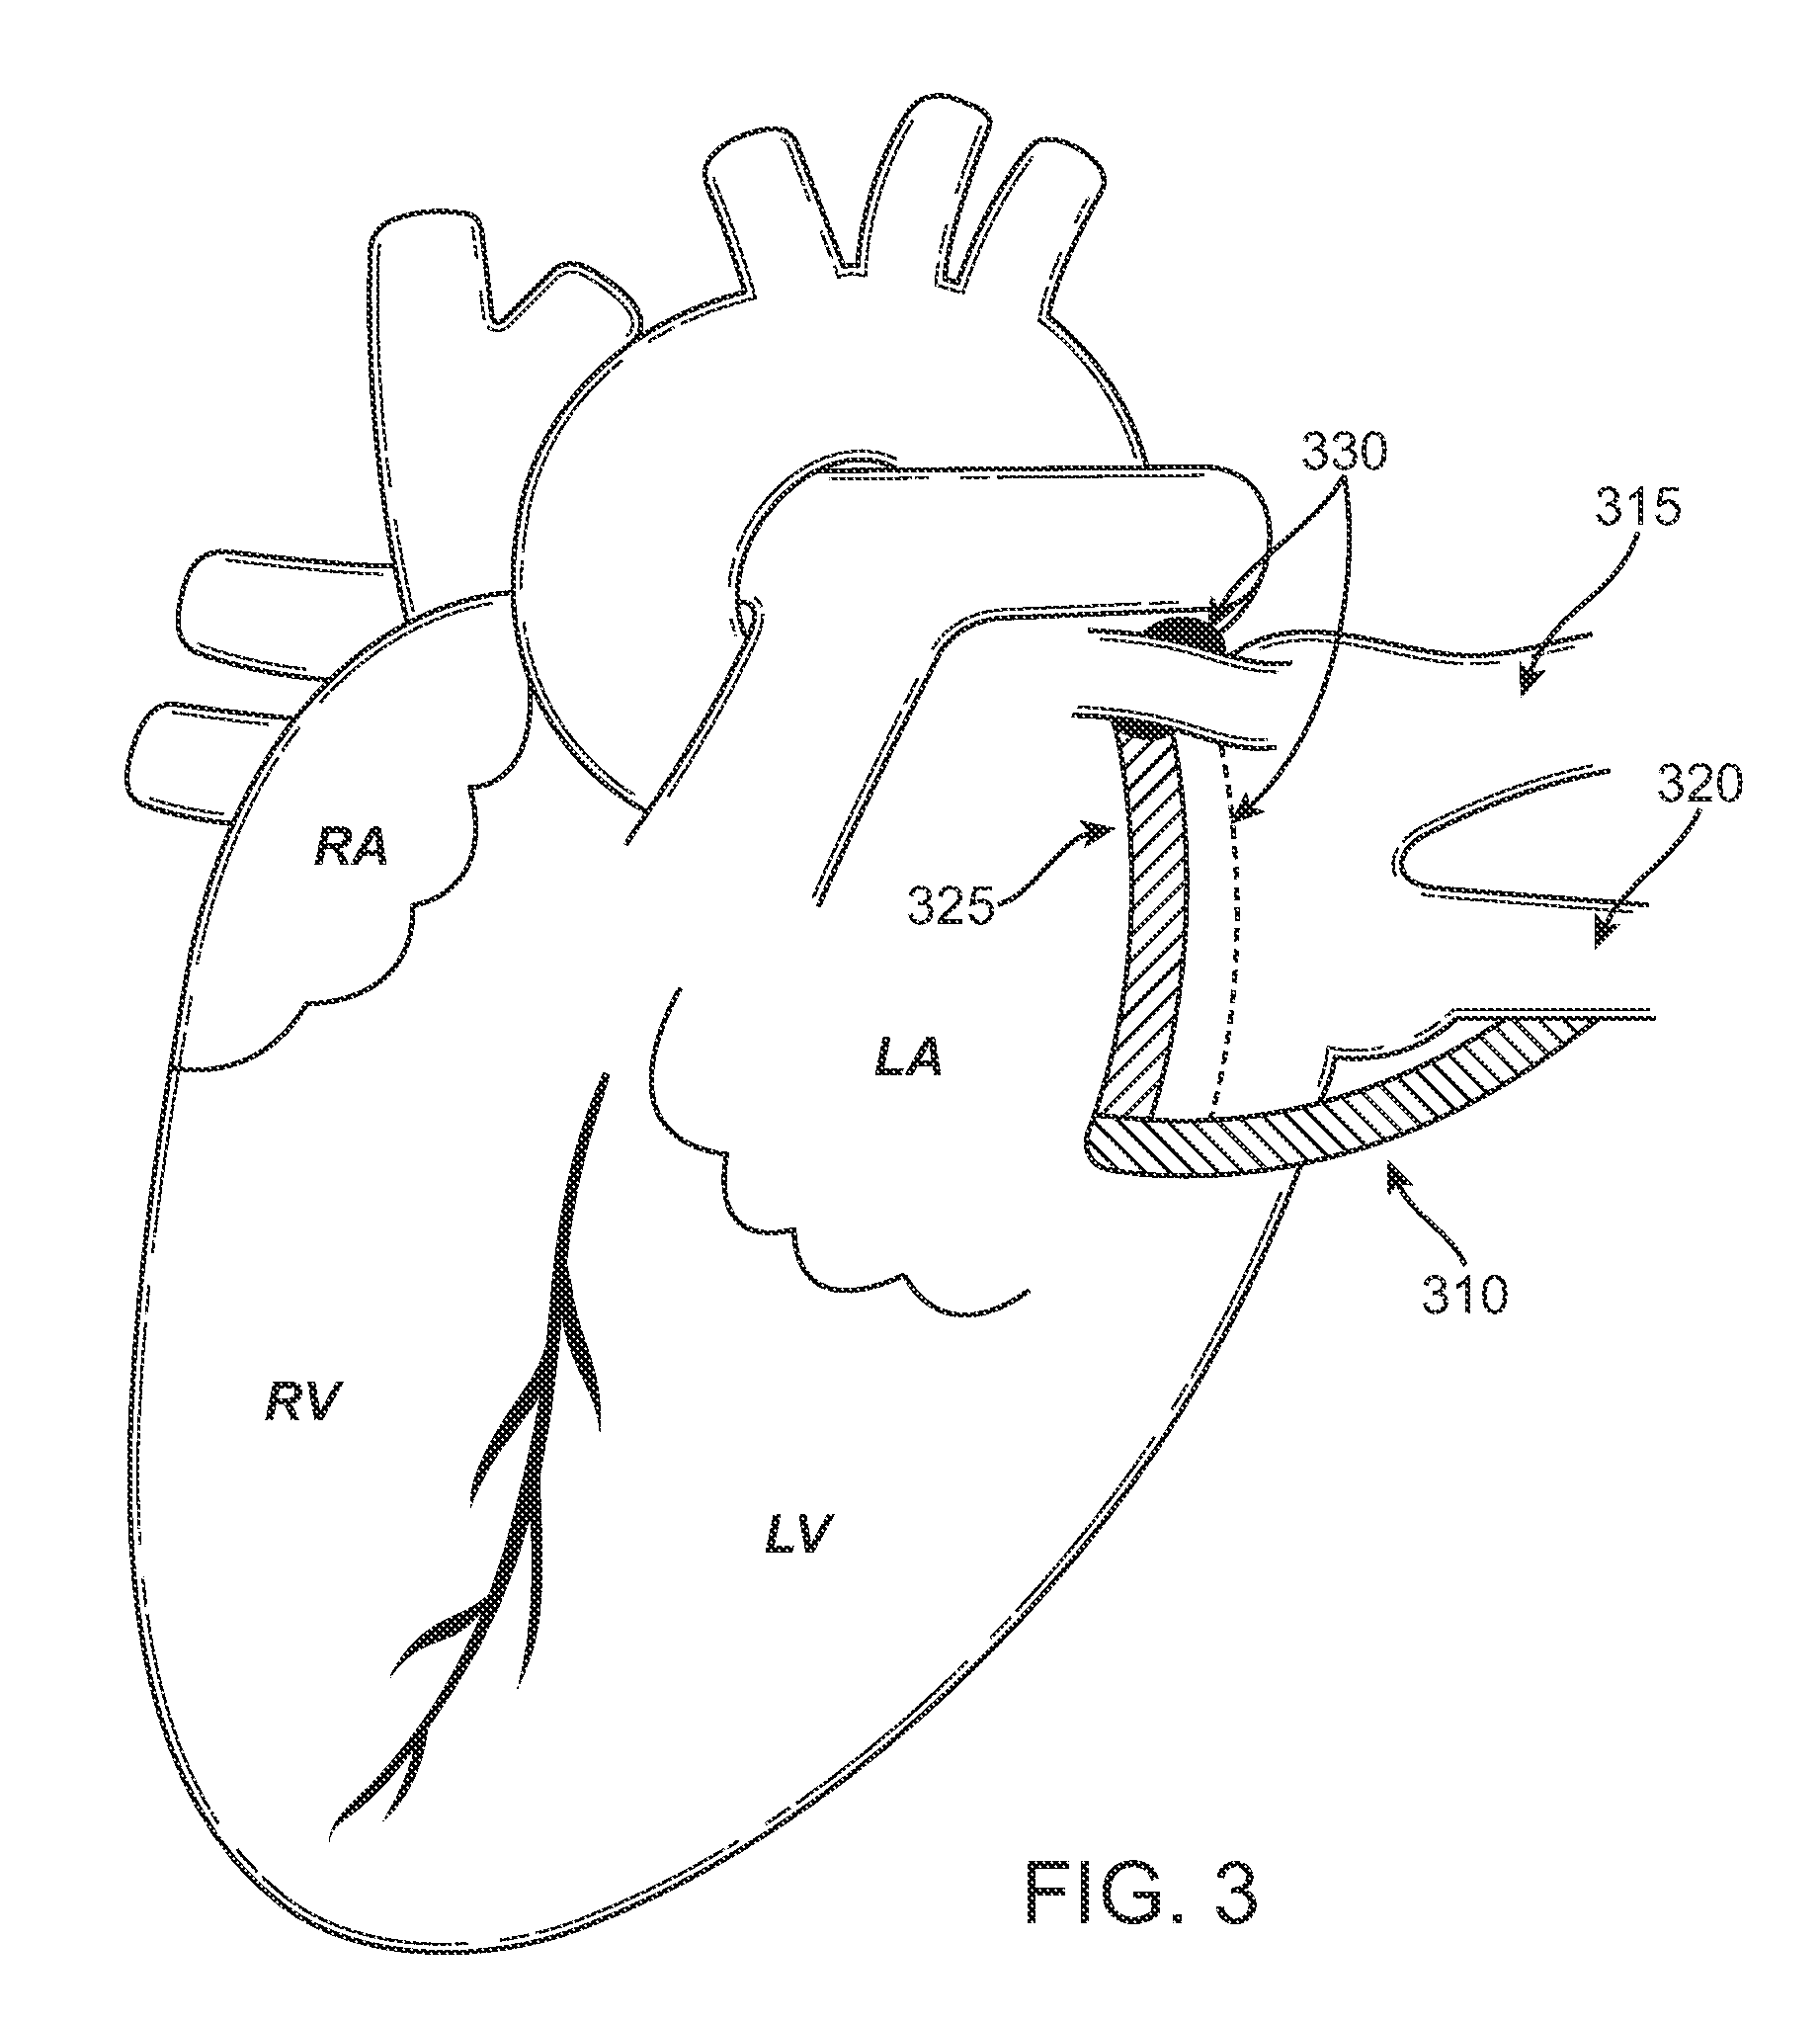 Methods of treating a cardiac arrhythmia by thoracoscopic production of a Cox maze III lesion set